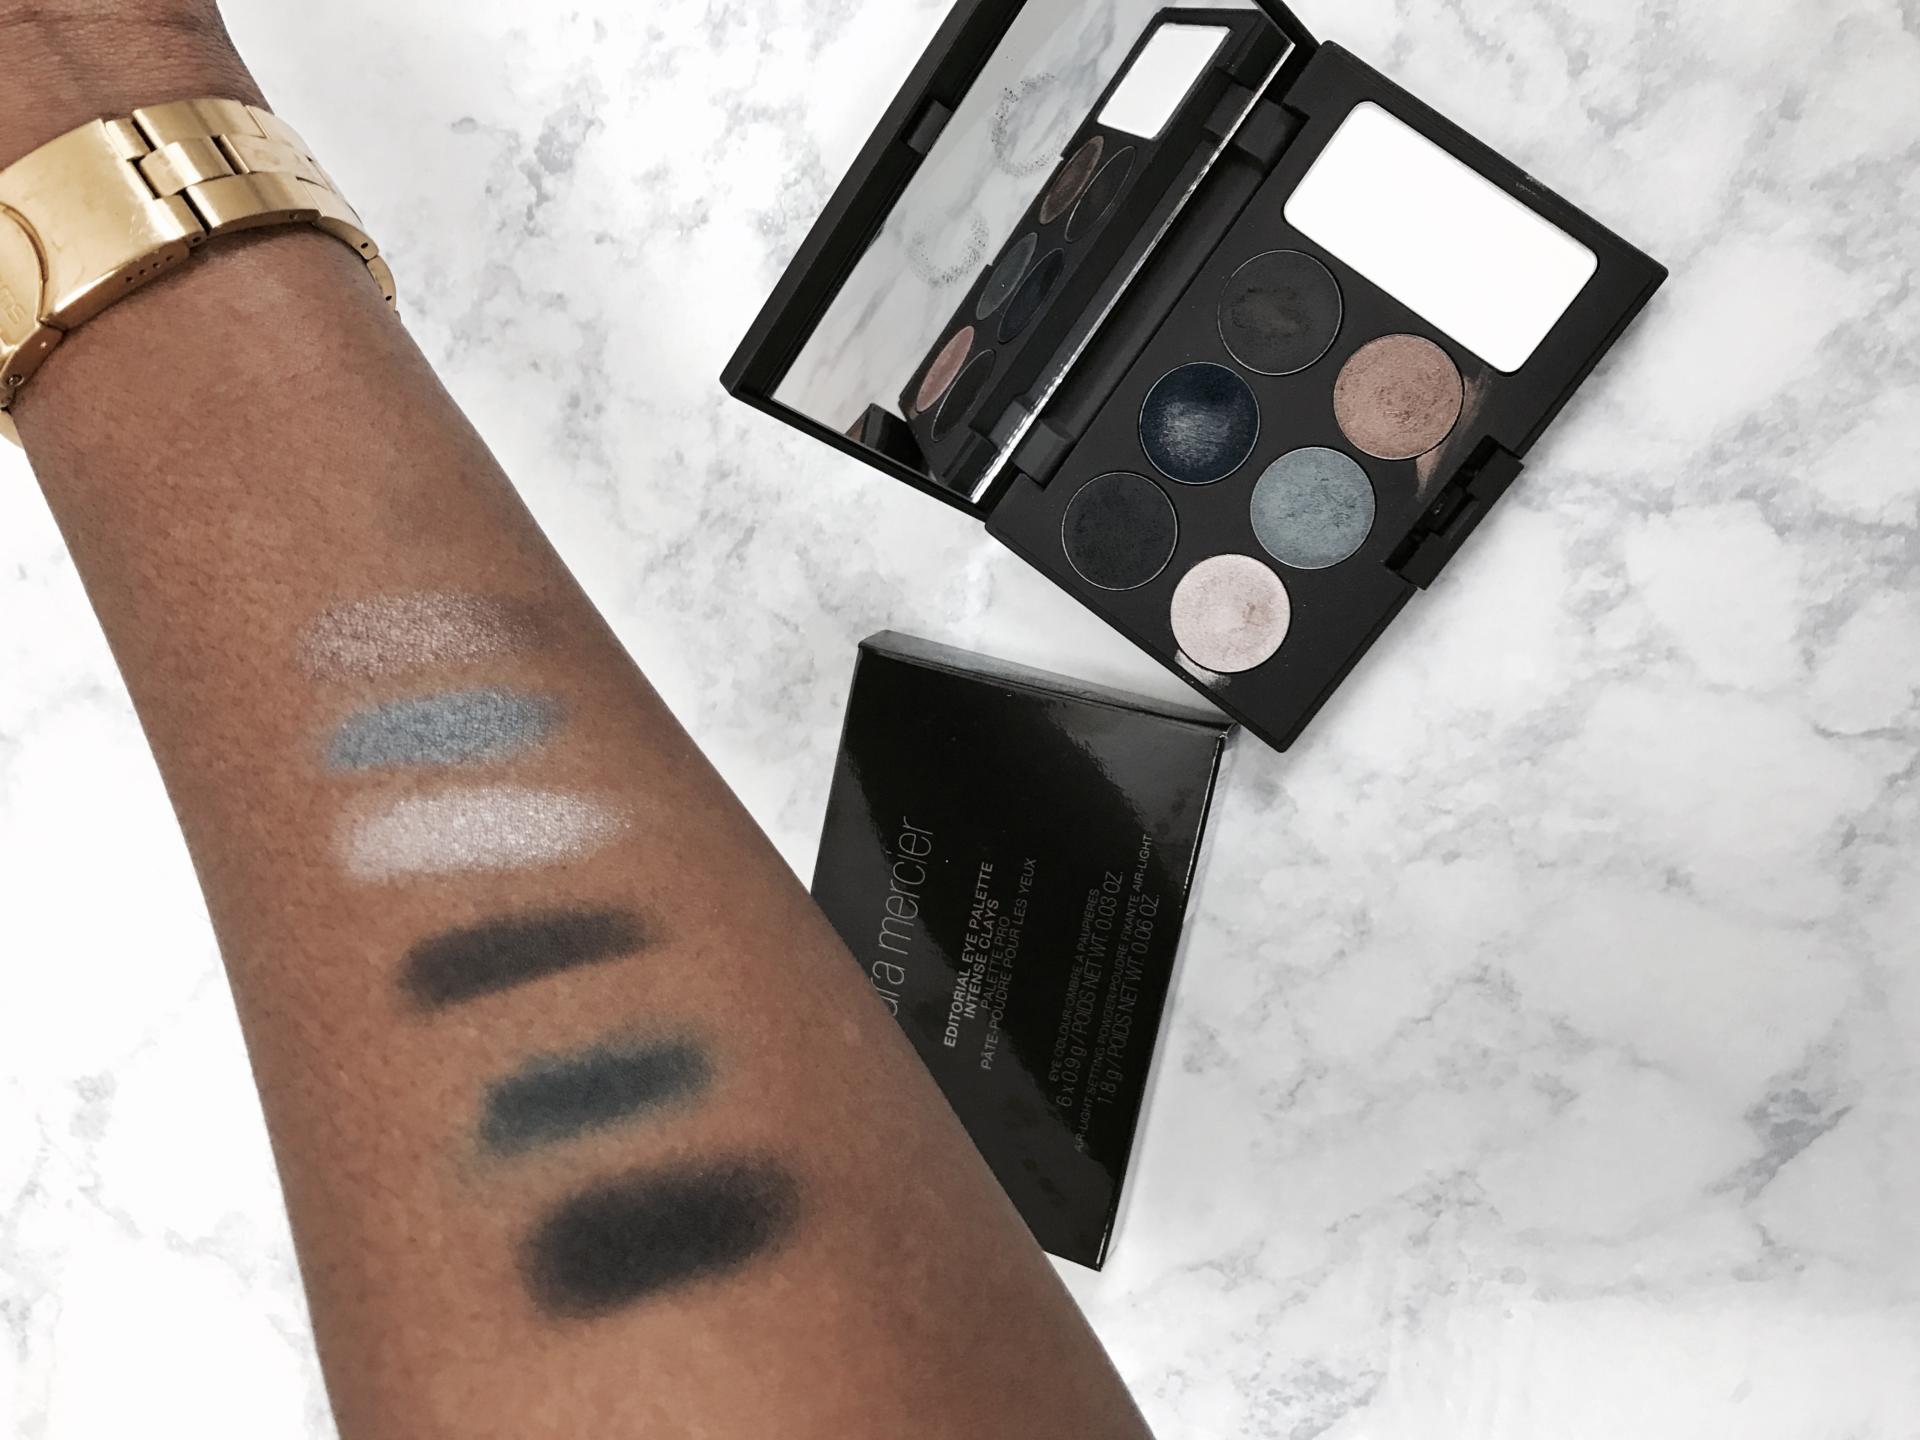 Laura Mercier Editorial Clay Palette Swatch and Review